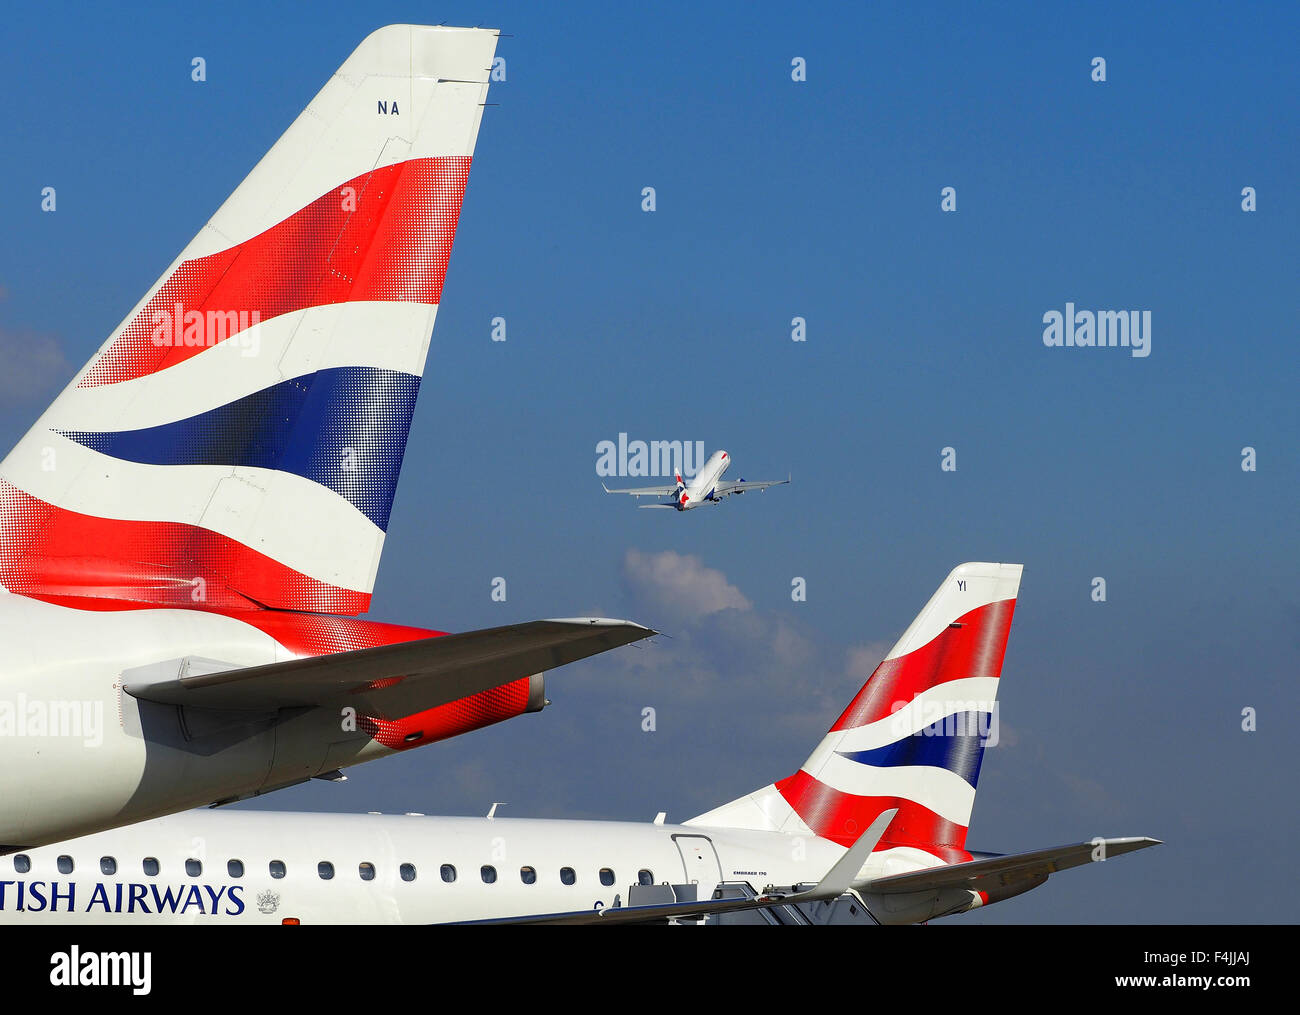 British Airways plane taking off and two BA tail fins, London City Airport, London, Britain, UK Stock Photo